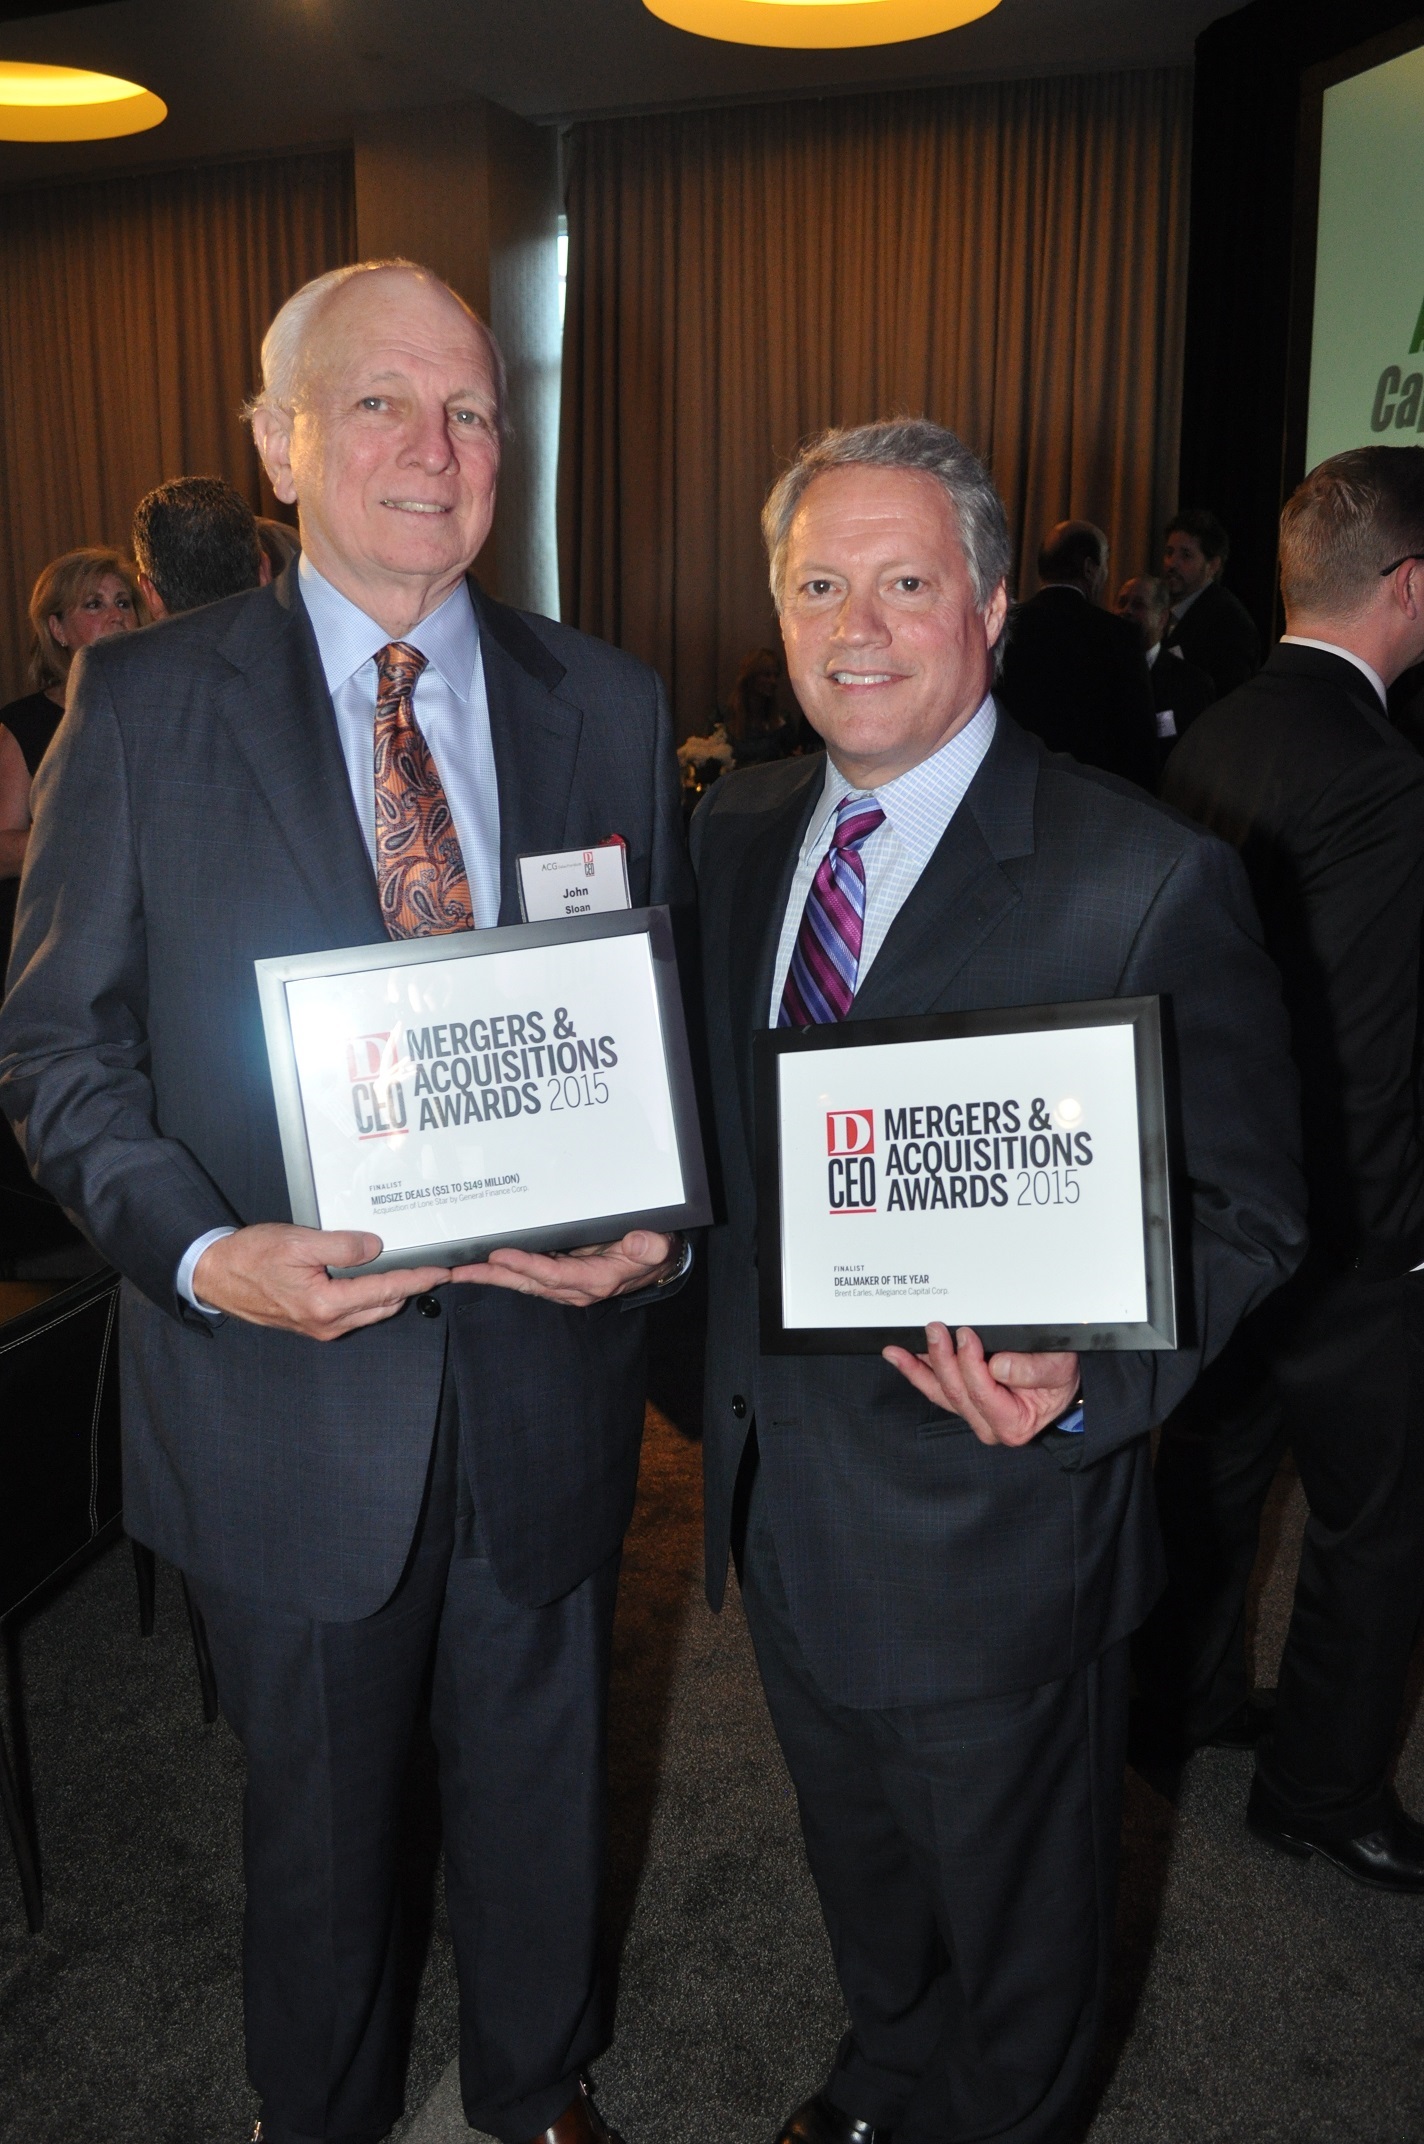 John Sloan (Left) and Brent Earles were both finalists in the Dallas ACG M&A Awards. Earles was a finalist in the Deal Maker of the Year competition.